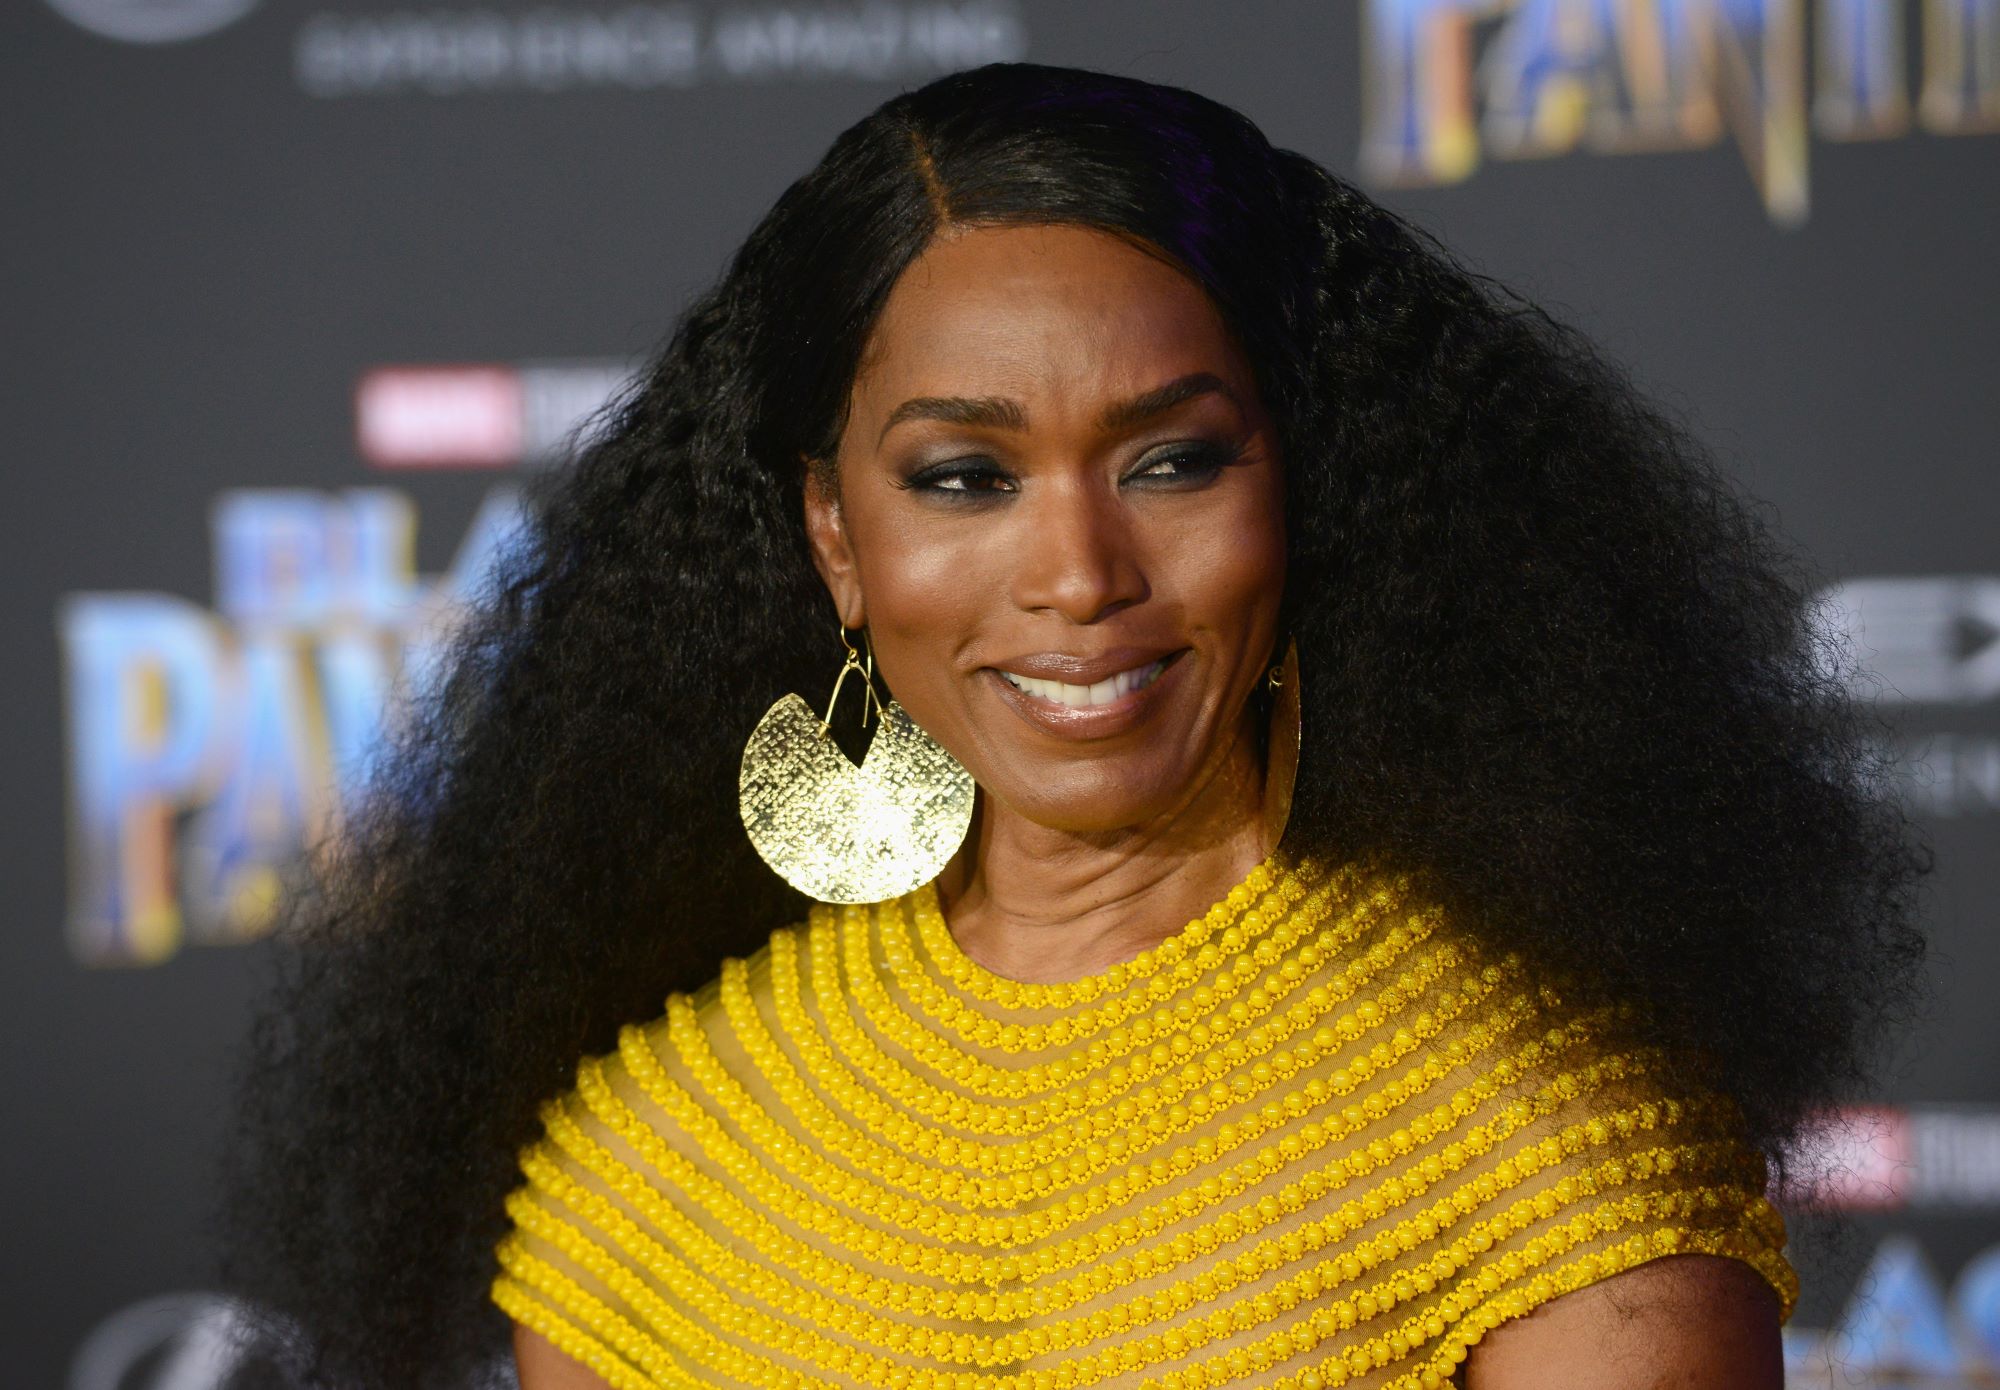 'Black Panther 2' star Angela Bassett wears a yellow short-sleeved dress and big circle gold earrings.